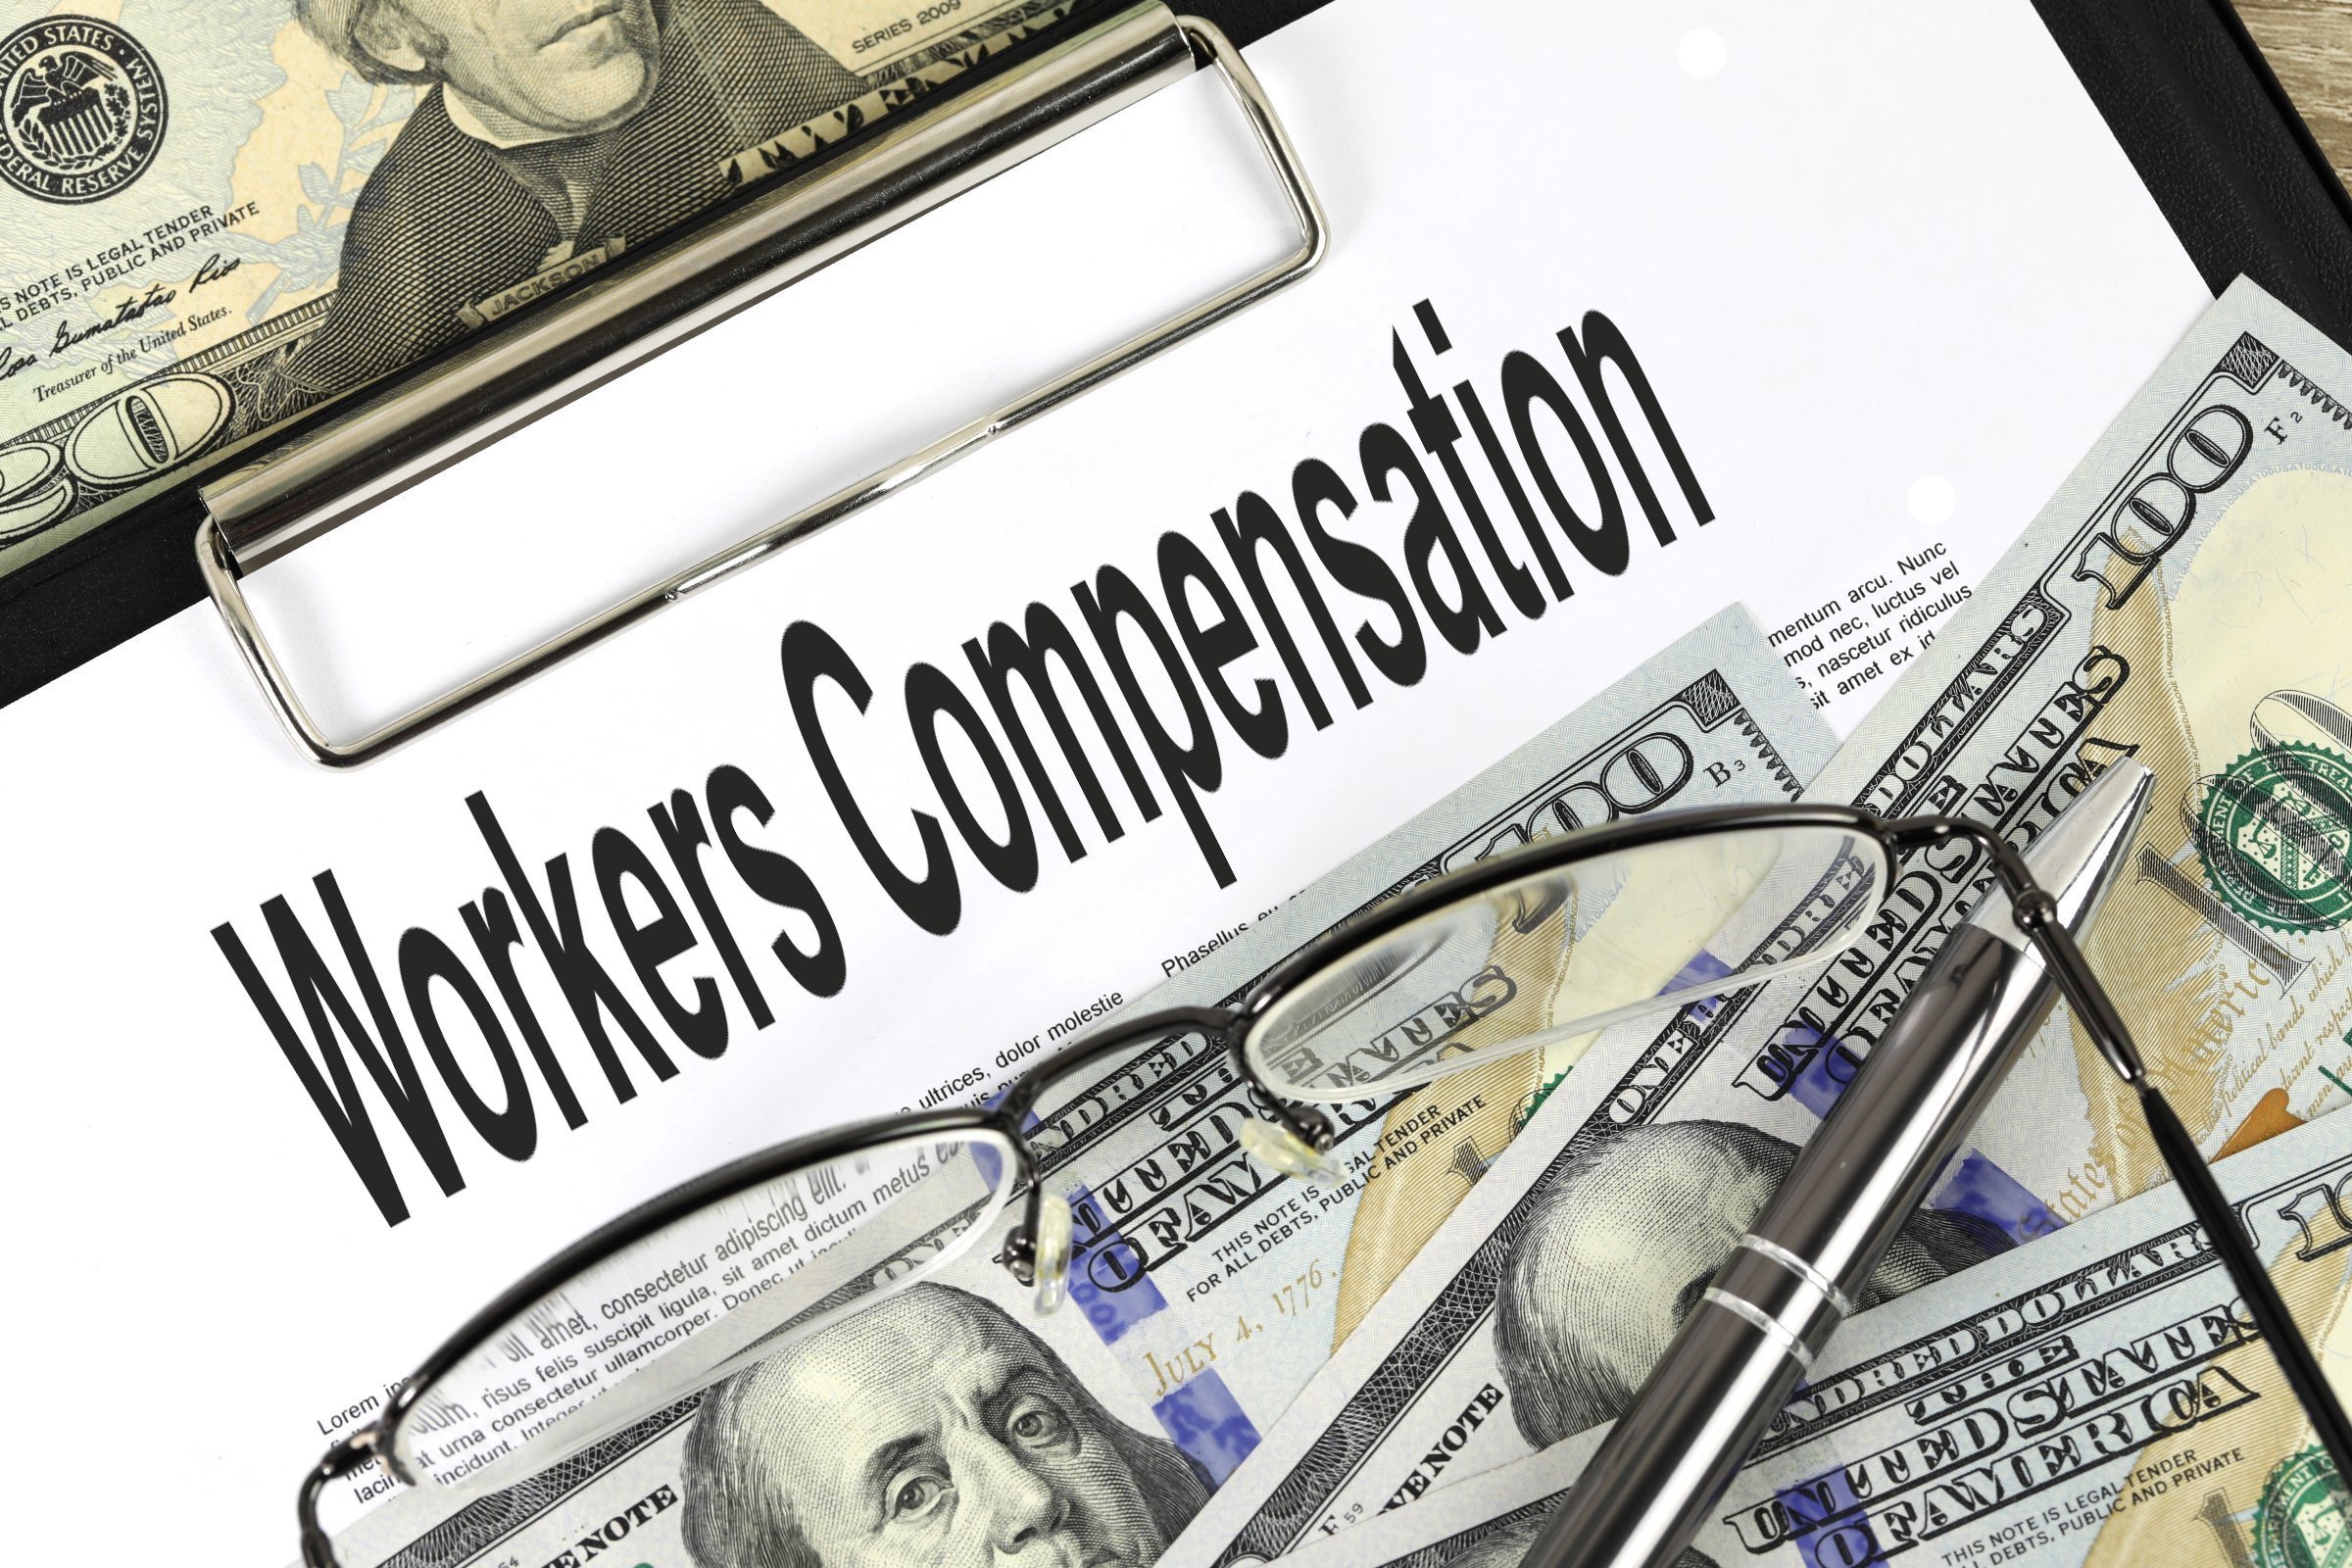 Workers Compensation - Free of Charge Creative Commons Financial 3 image